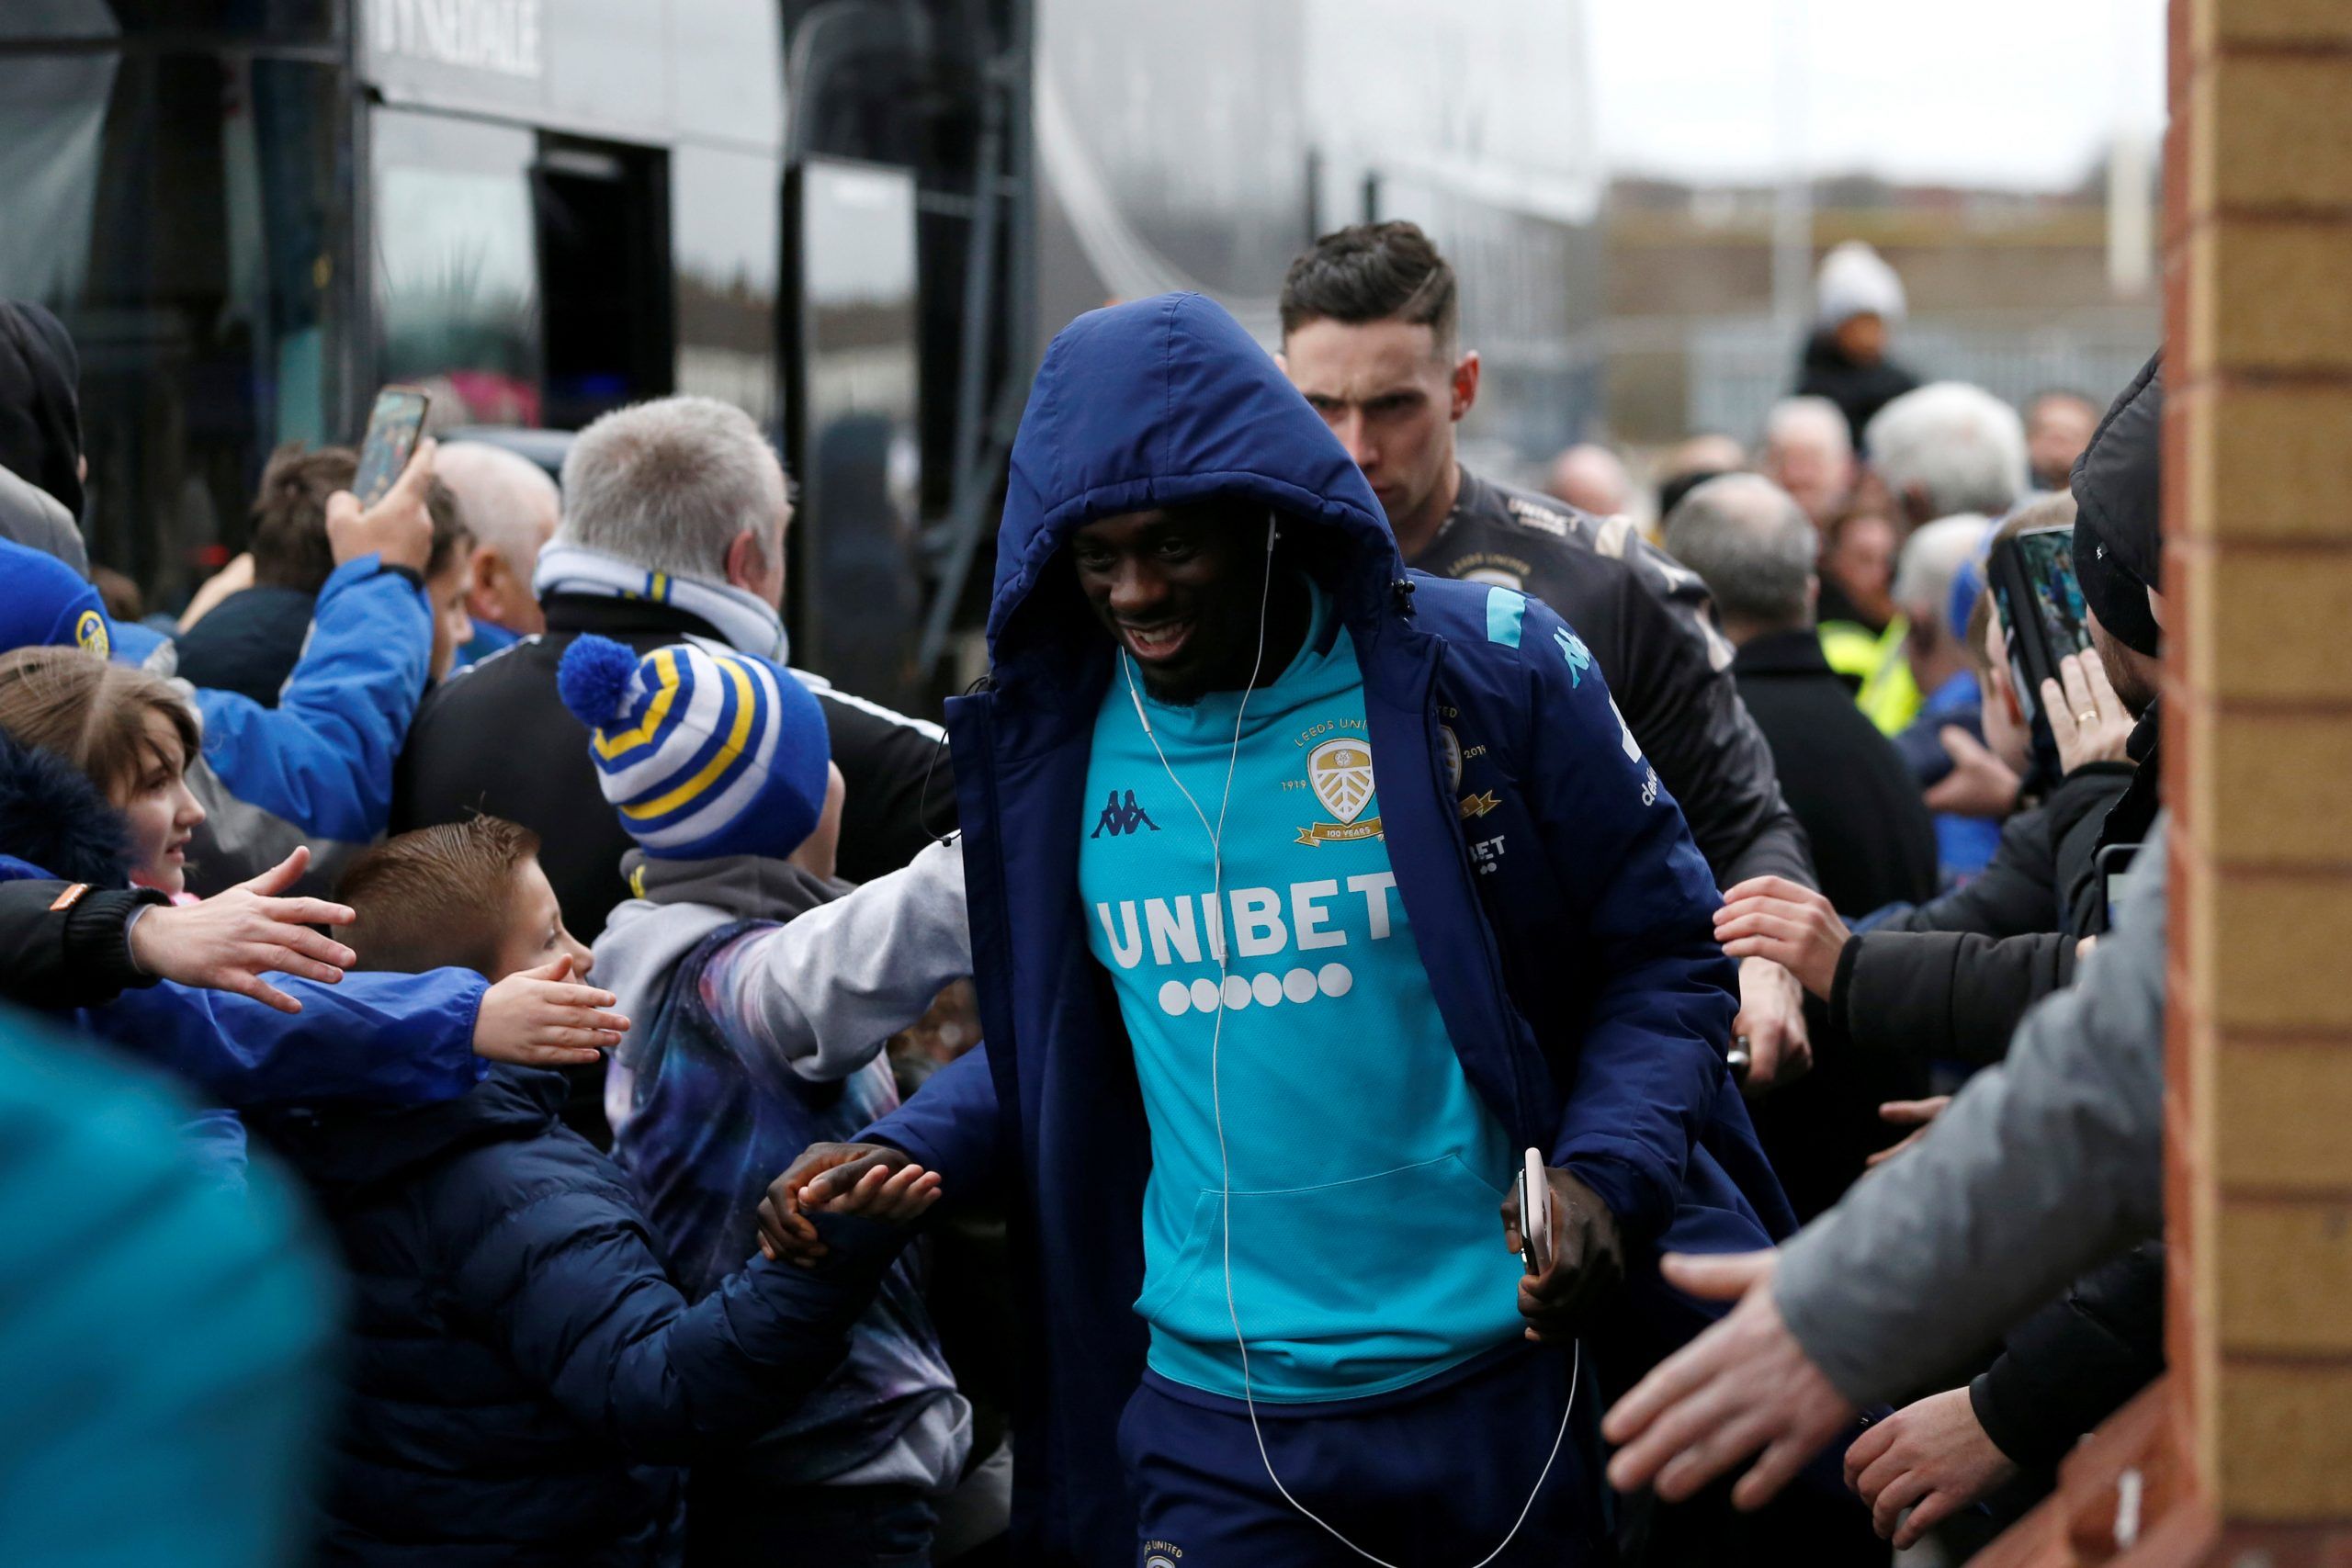 Soccer Football - Championship - Leeds United v Bristol City - Elland Road, Leeds, Britain - February 15, 2020  Leeds United's Jean-Kevin Augustin arrives outside the stadium before the match  Action Images/Ed Sykes  EDITORIAL USE ONLY. No use with unauthorized audio, video, data, fixture lists, club/league logos or 